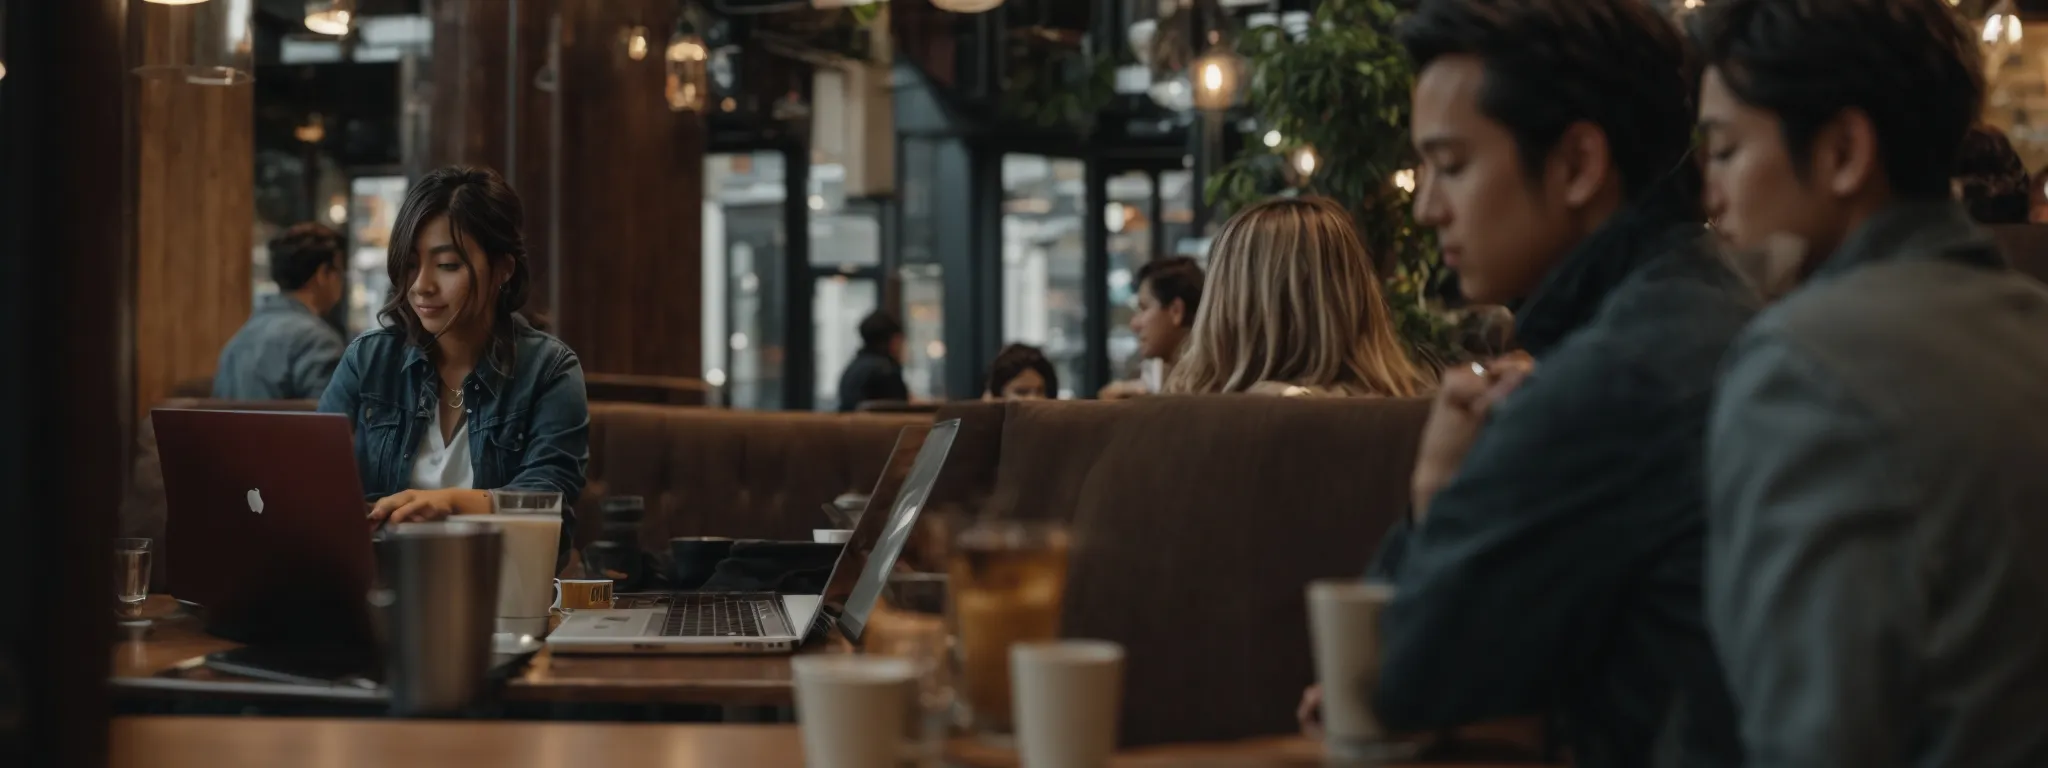 a person using a laptop at a cozy café in a bustling city center, symbolizing targeted online business strategies in an urban setting.